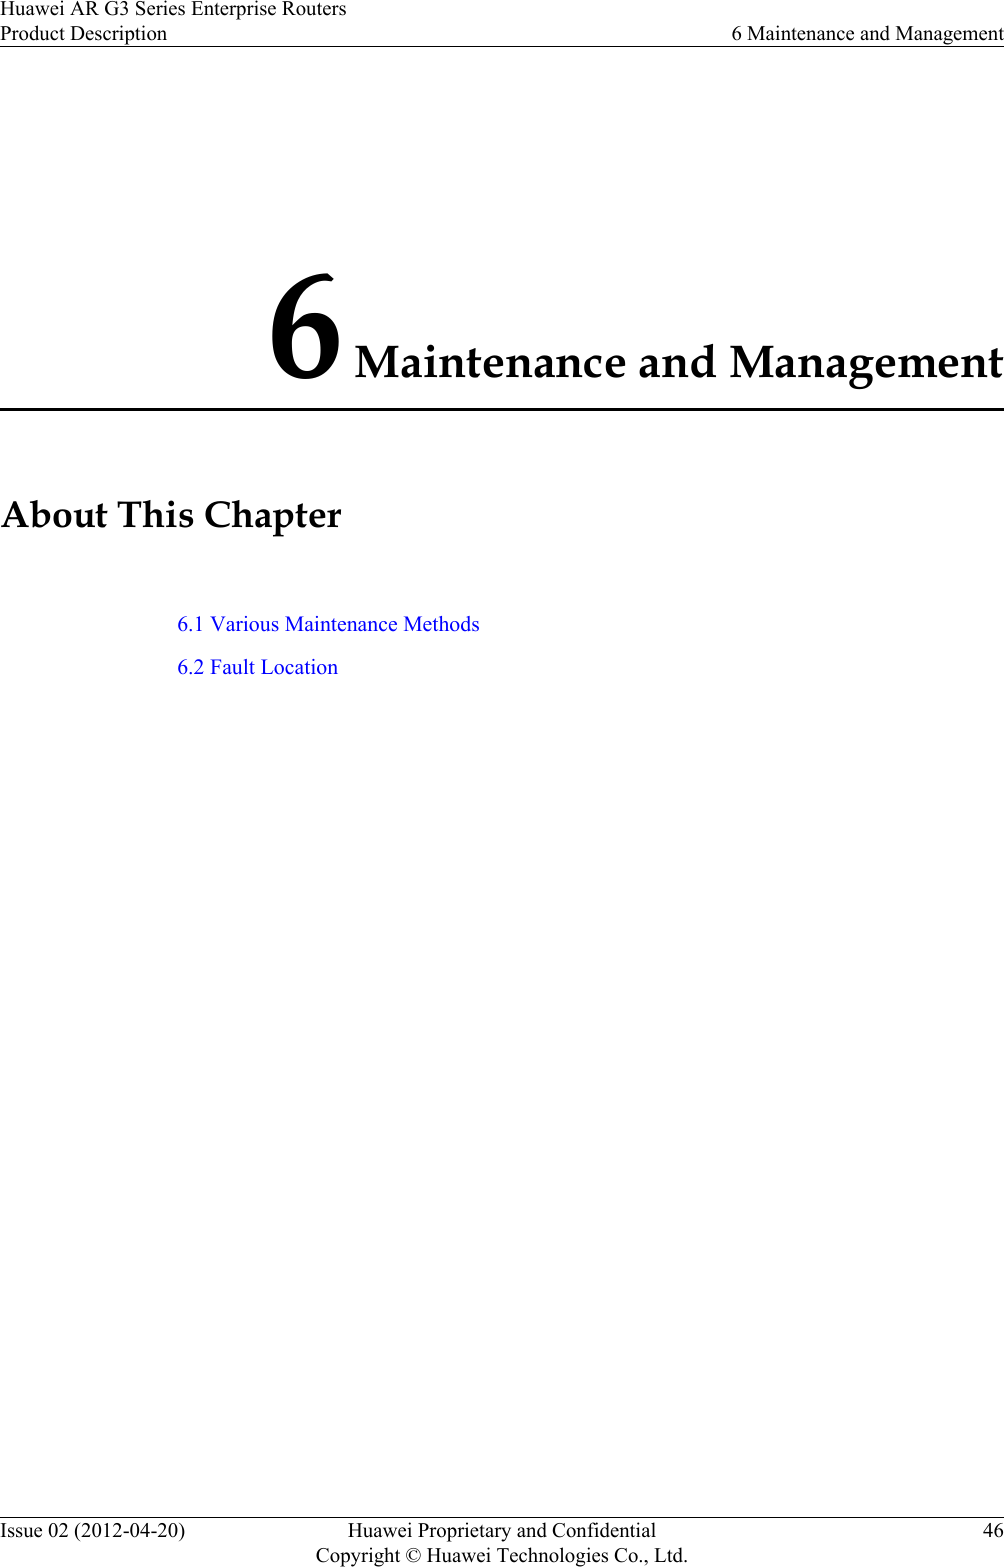 6 Maintenance and ManagementAbout This Chapter6.1 Various Maintenance Methods6.2 Fault LocationHuawei AR G3 Series Enterprise RoutersProduct Description 6 Maintenance and ManagementIssue 02 (2012-04-20) Huawei Proprietary and ConfidentialCopyright © Huawei Technologies Co., Ltd.46